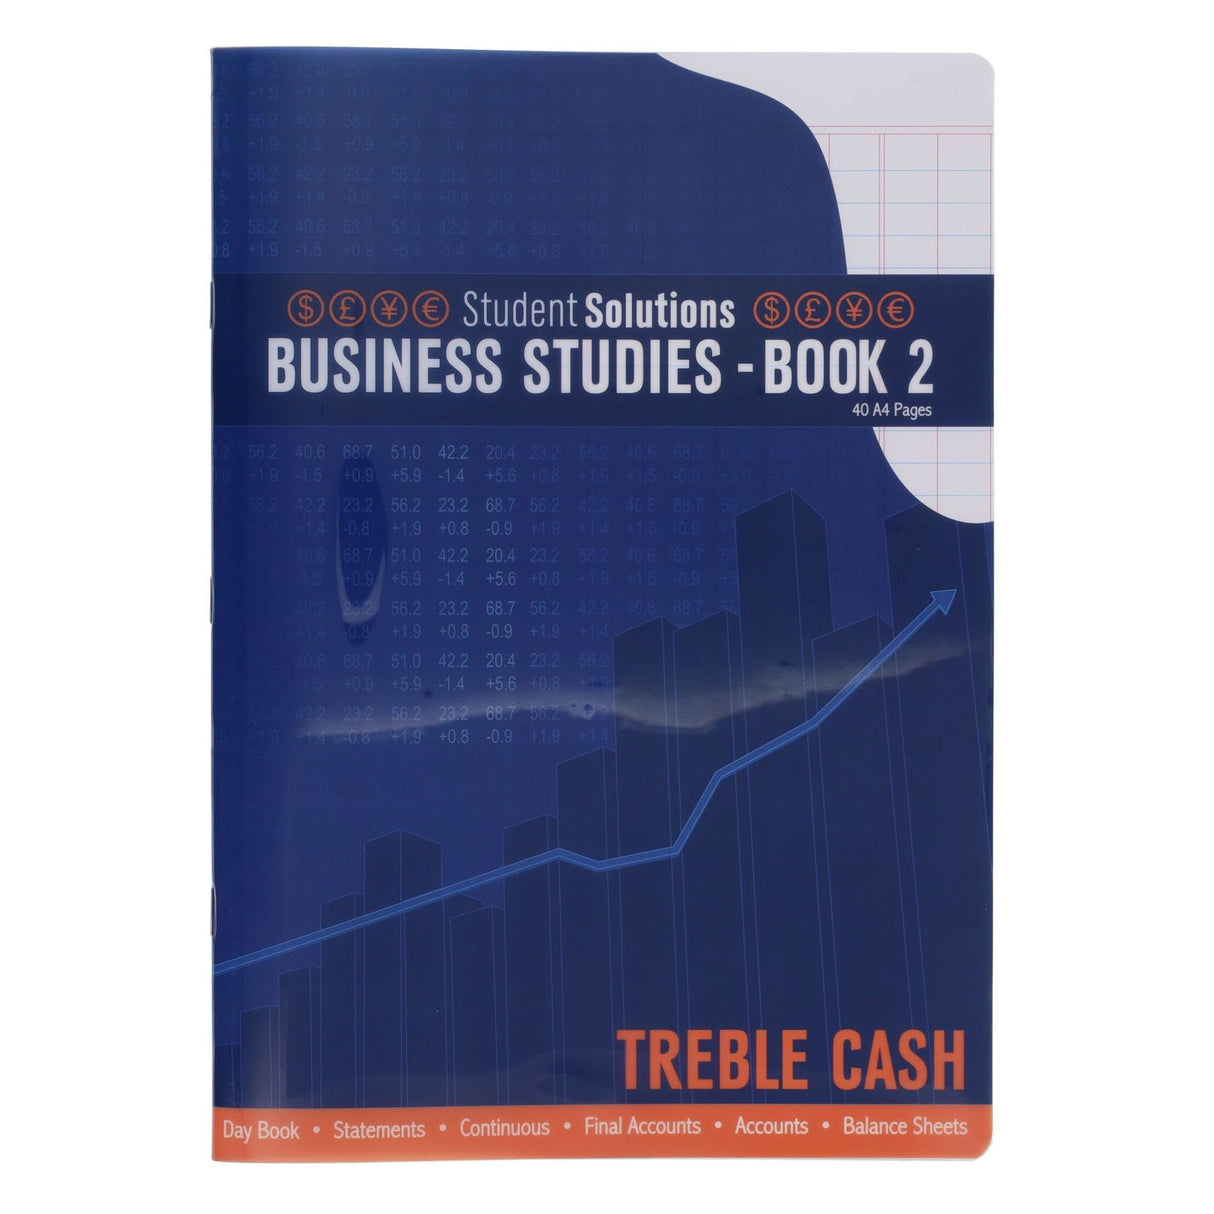 Student Solutions A4 Durable Cover Business Studies - 40 Pages - Book 2-Subject & Project Books-Student Solutions|StationeryShop.co.uk